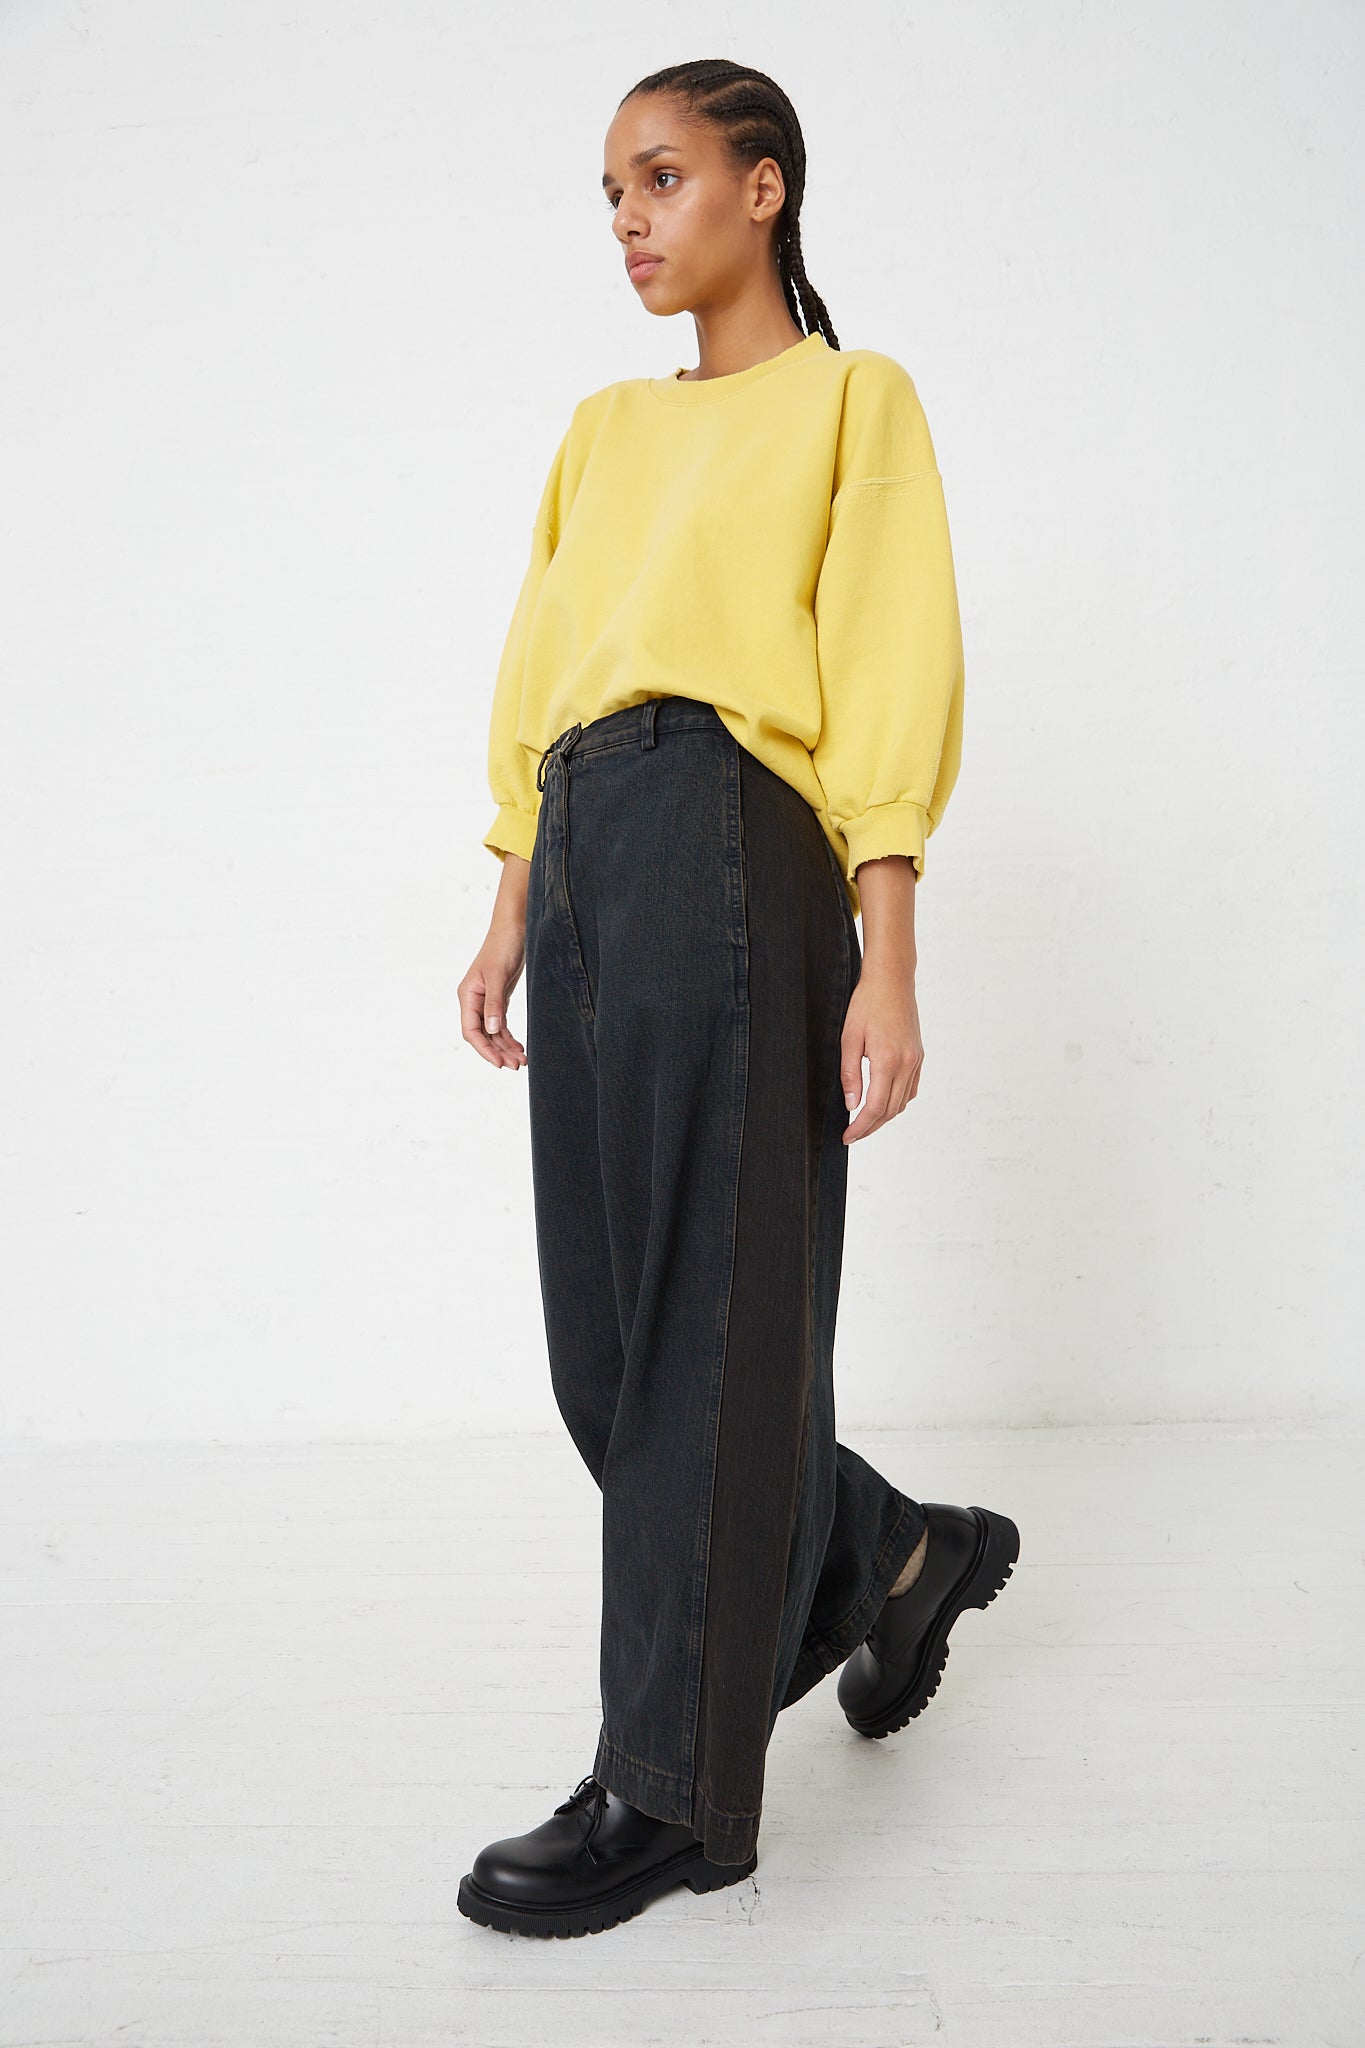 The model is wearing a yellow sweater and Denim Garra Pant in Brown by Rachel Comey in a relaxed fit.